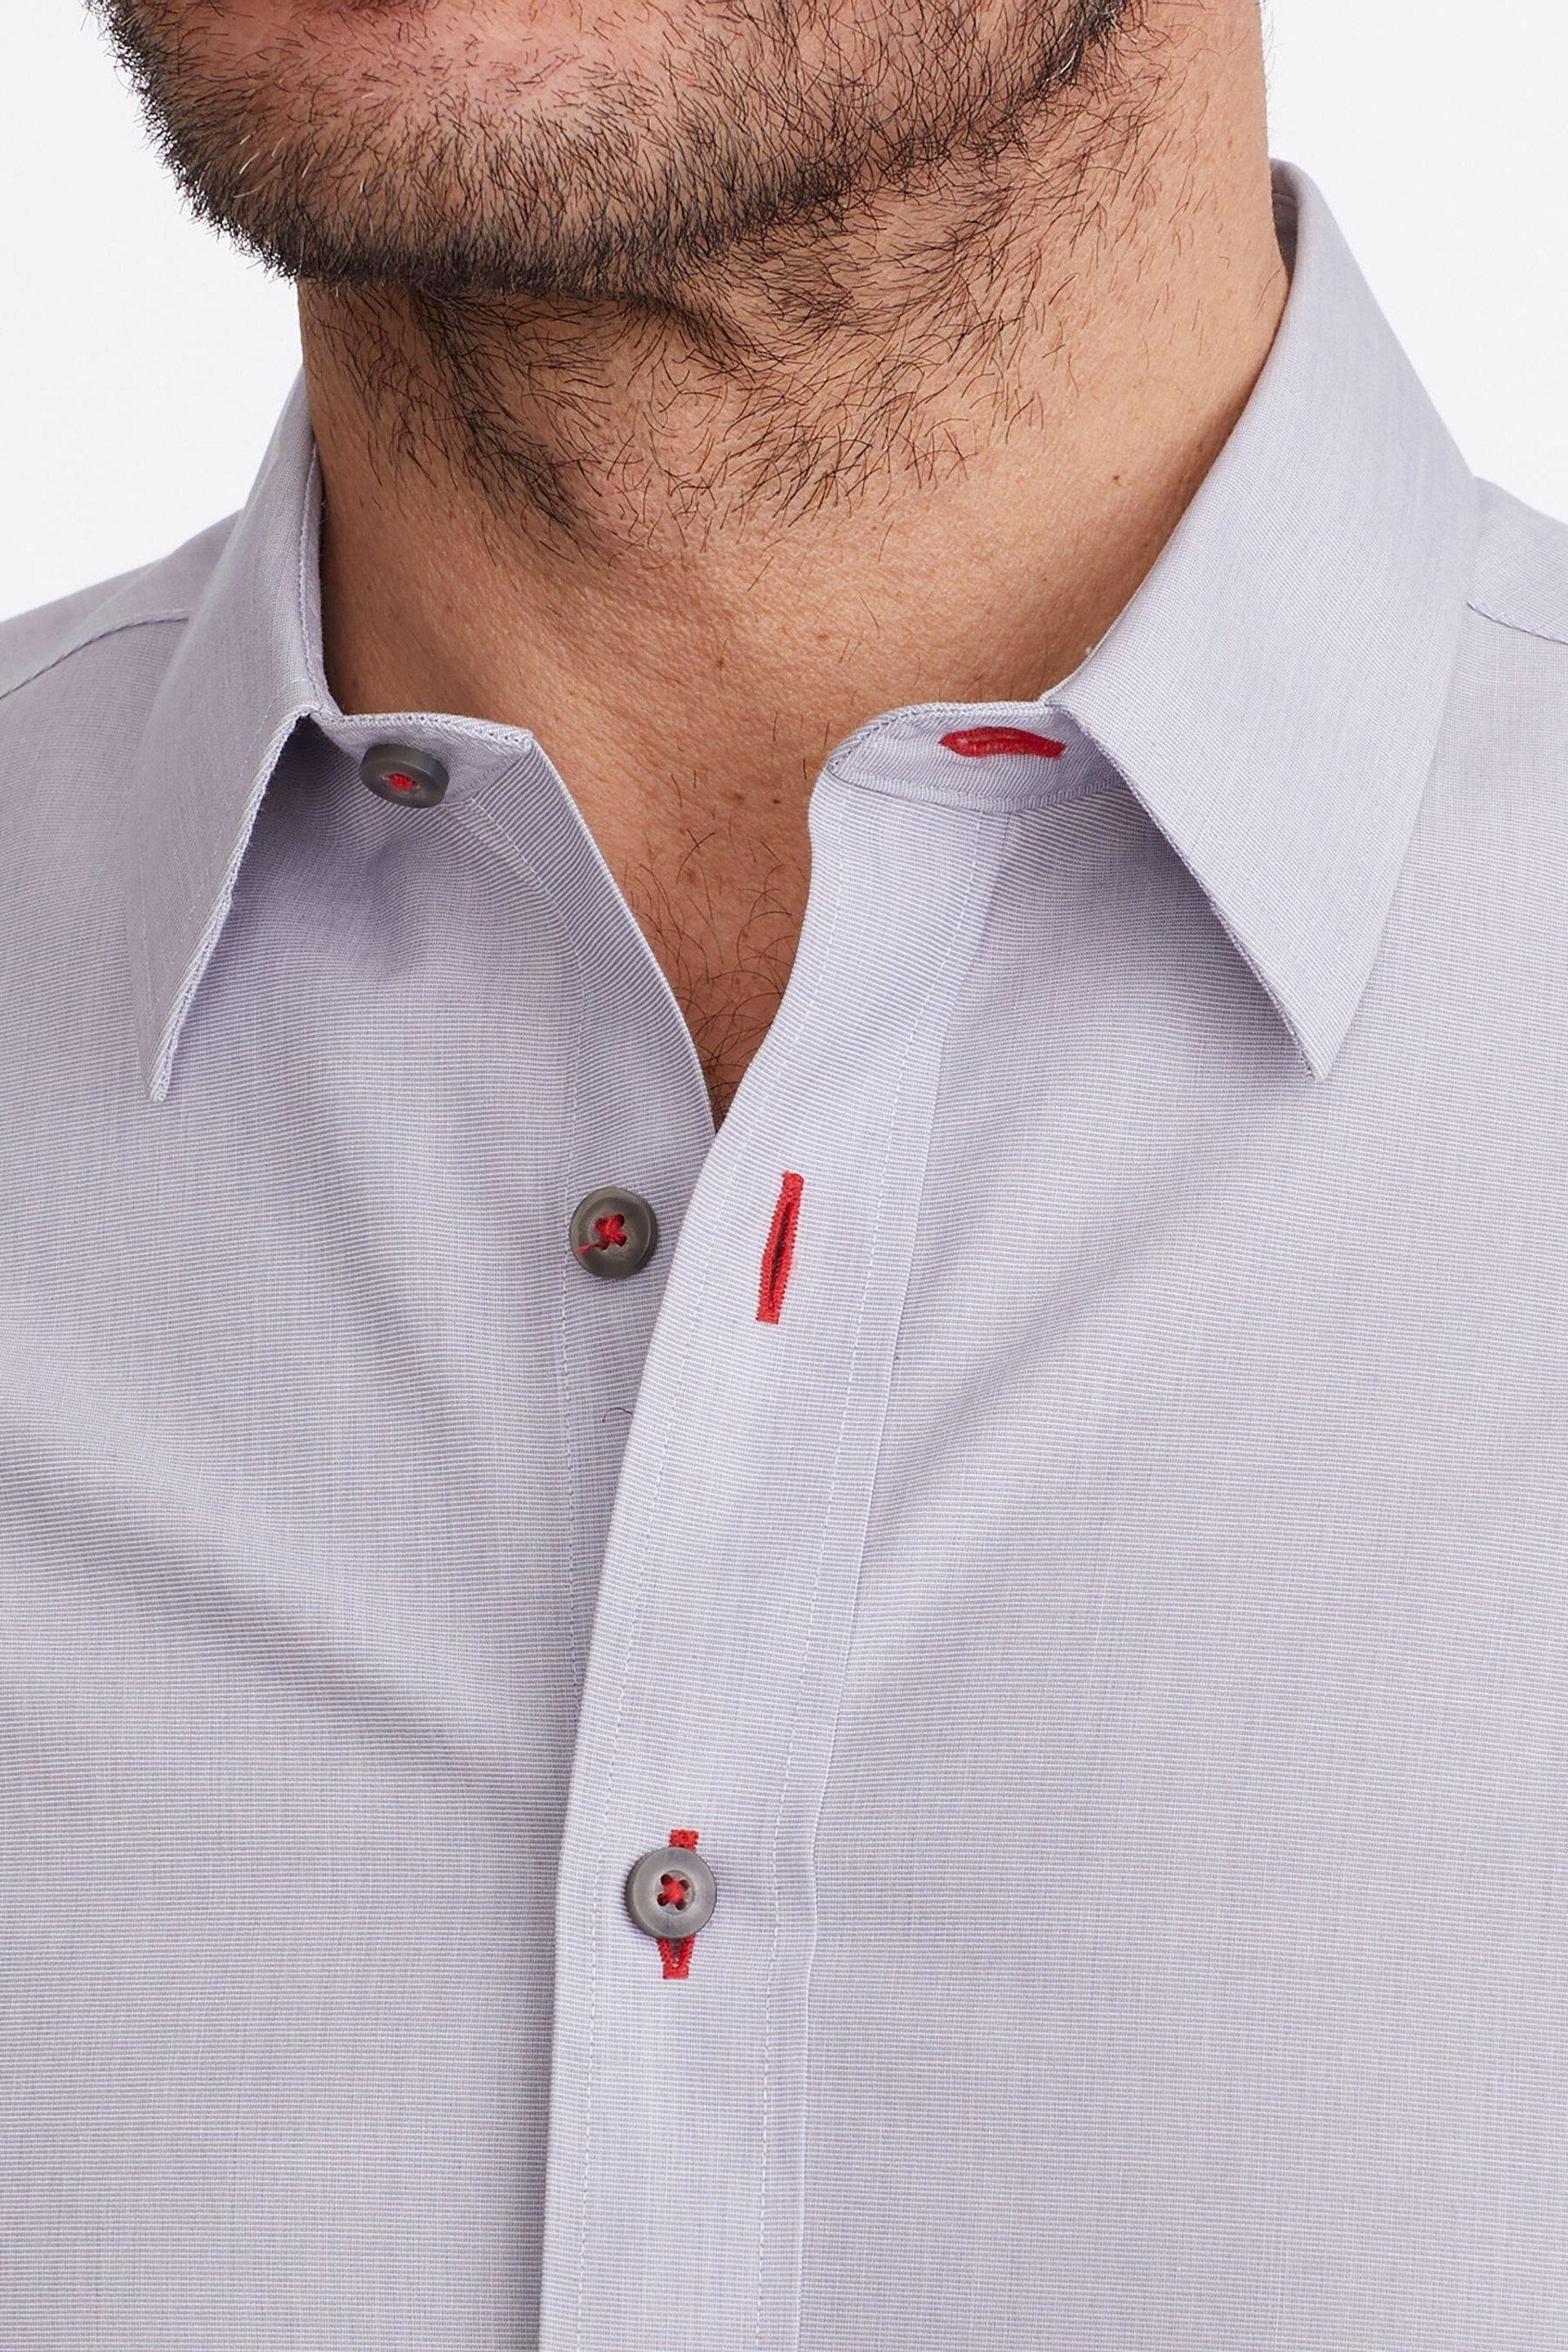 UNTUCKit Grey Wrinkle-Free Relaxed Fit Rubican Shirt - Image 4 of 5